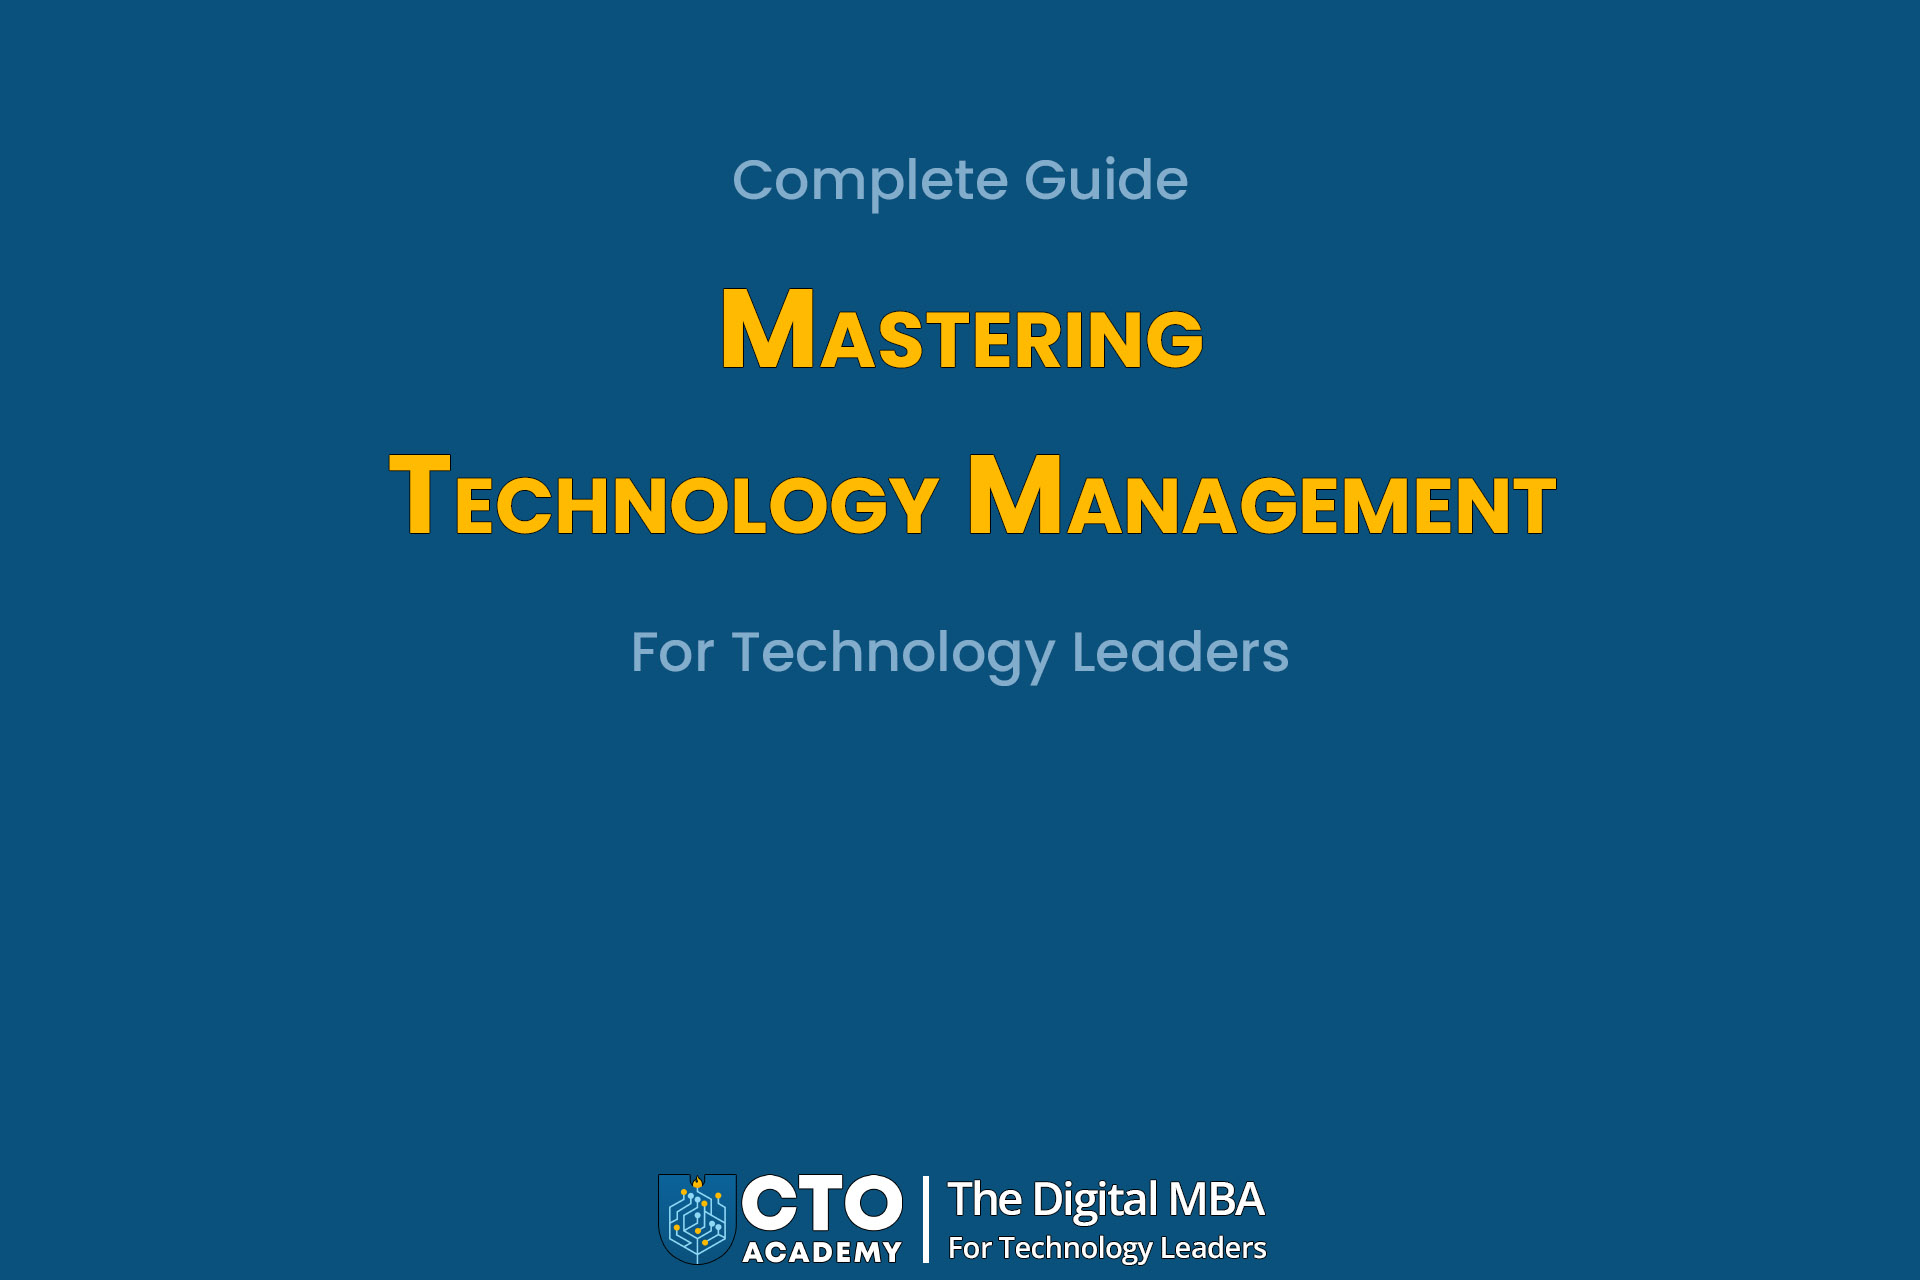 Mastering Technology Management-Complete Guide for Technology Leaders--featured image